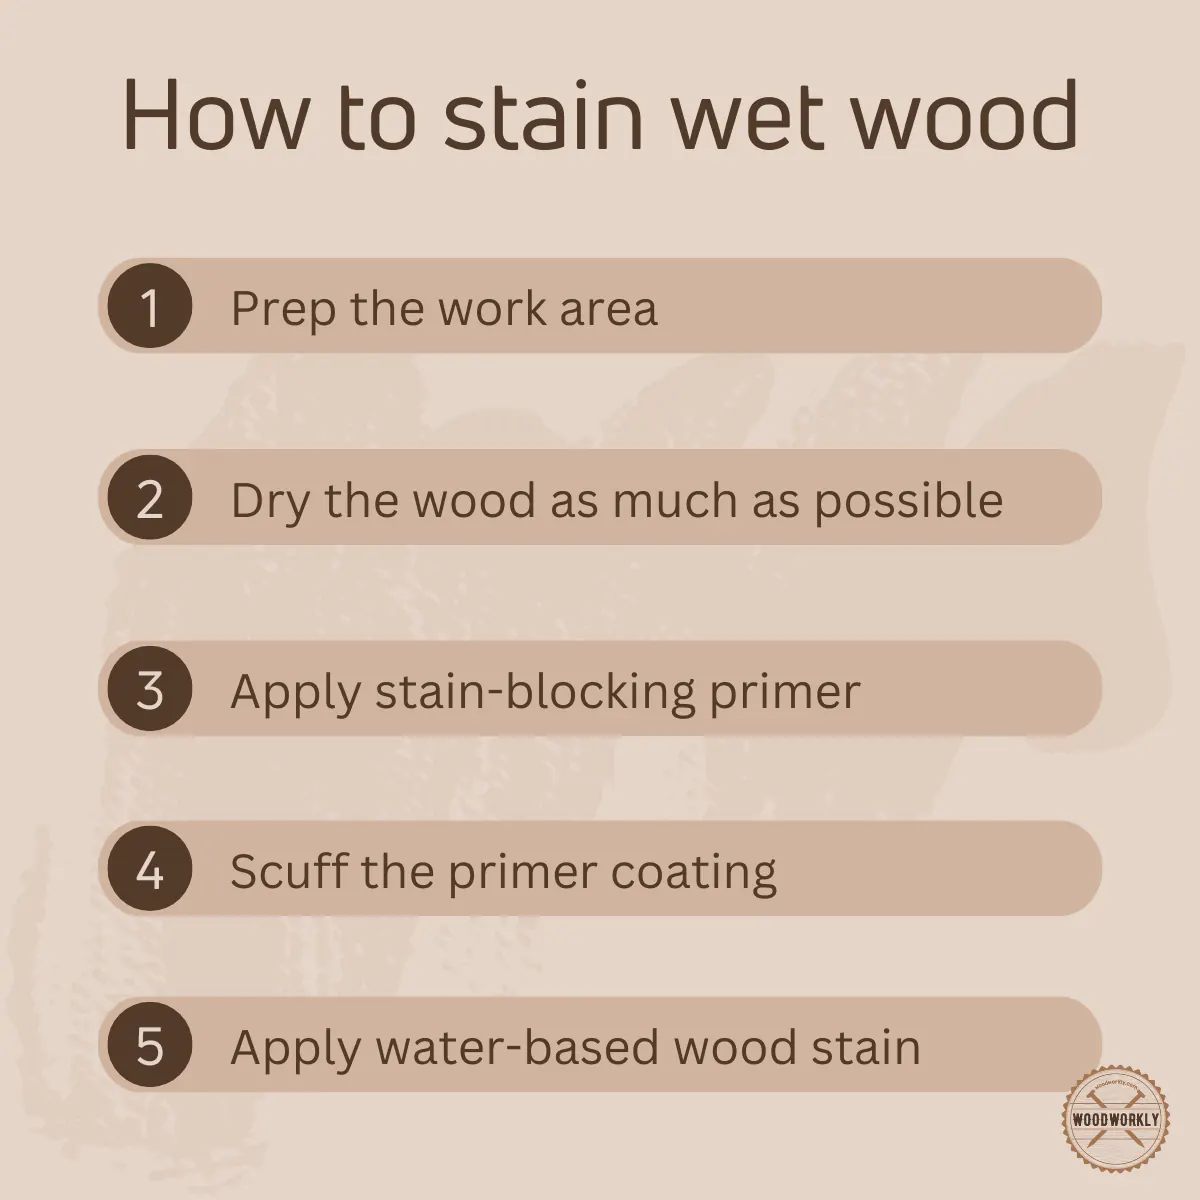 How to stain wet wood